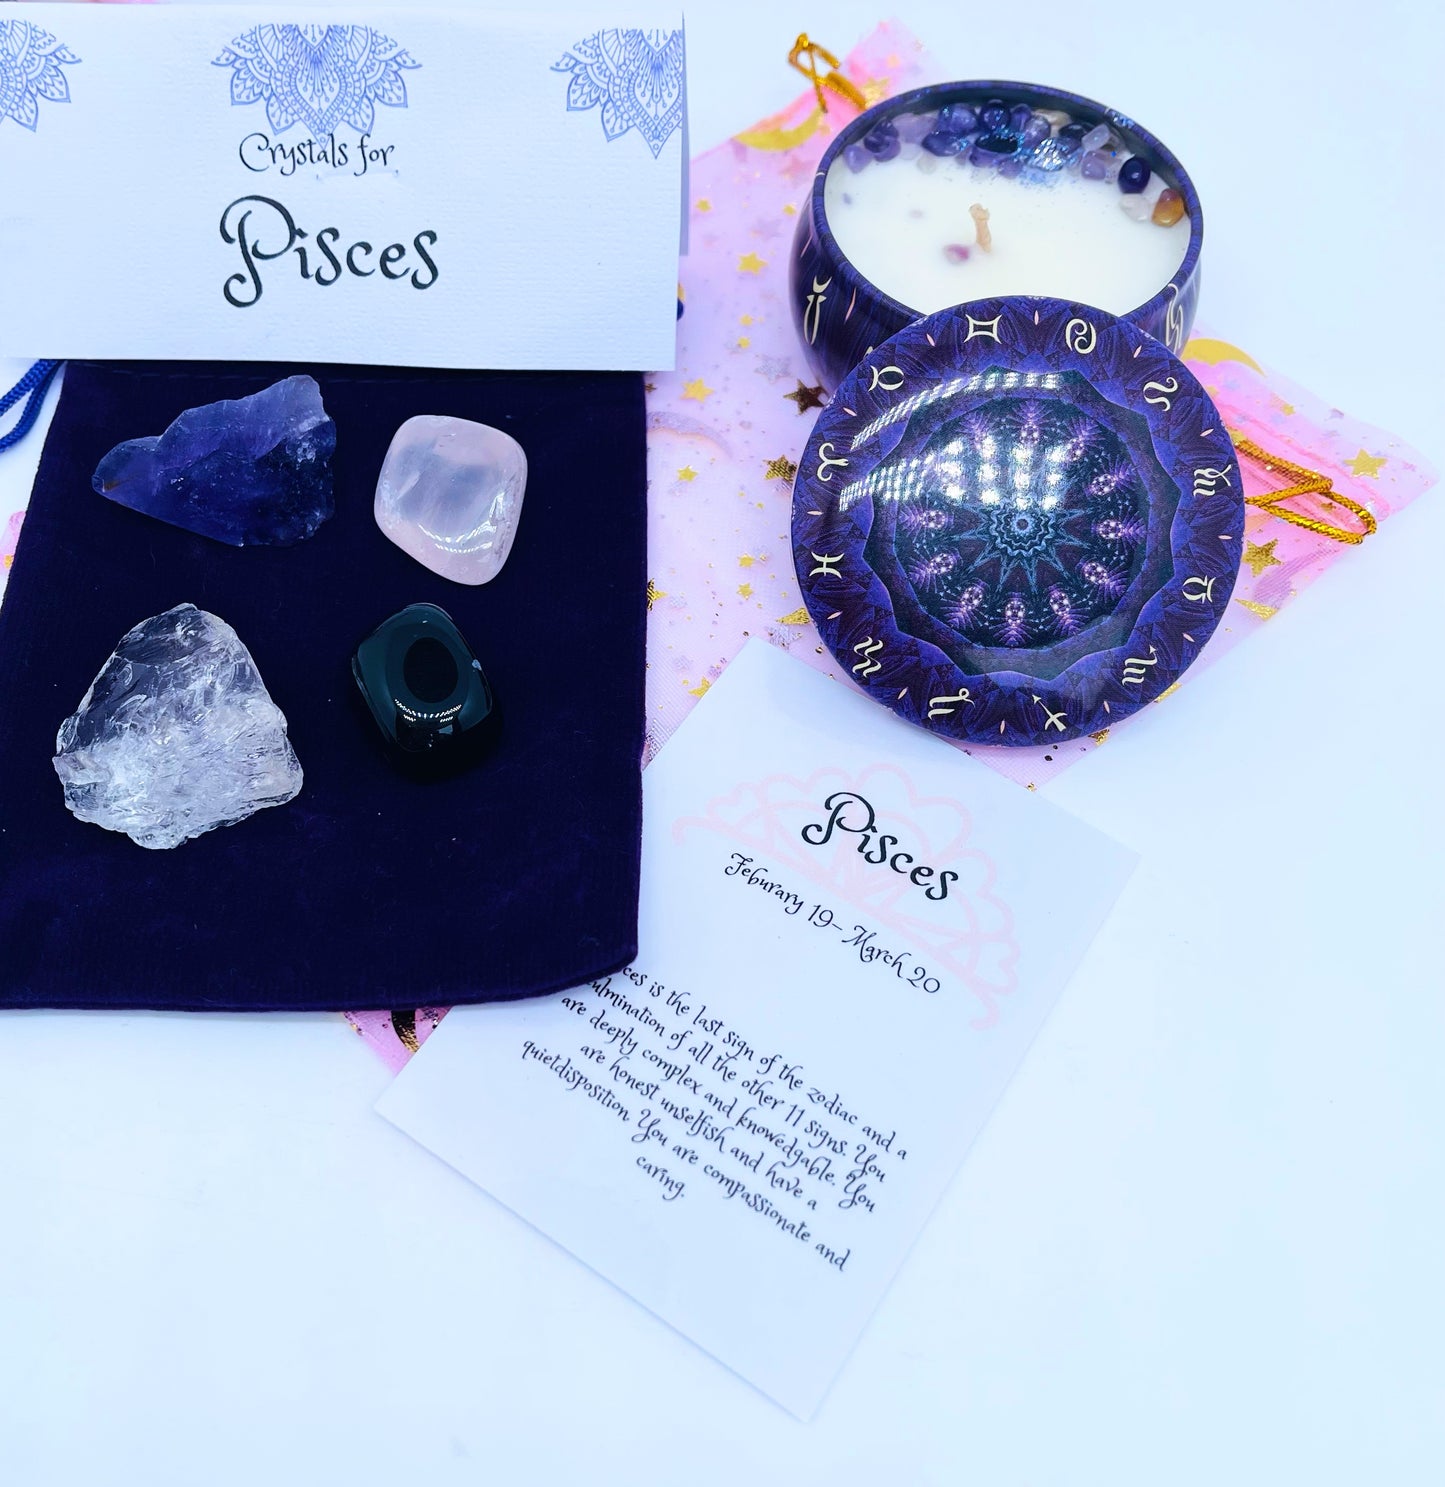 Gemini zodiac candle gift set with candle and four crystals for this sign sitting on a velvet bag.